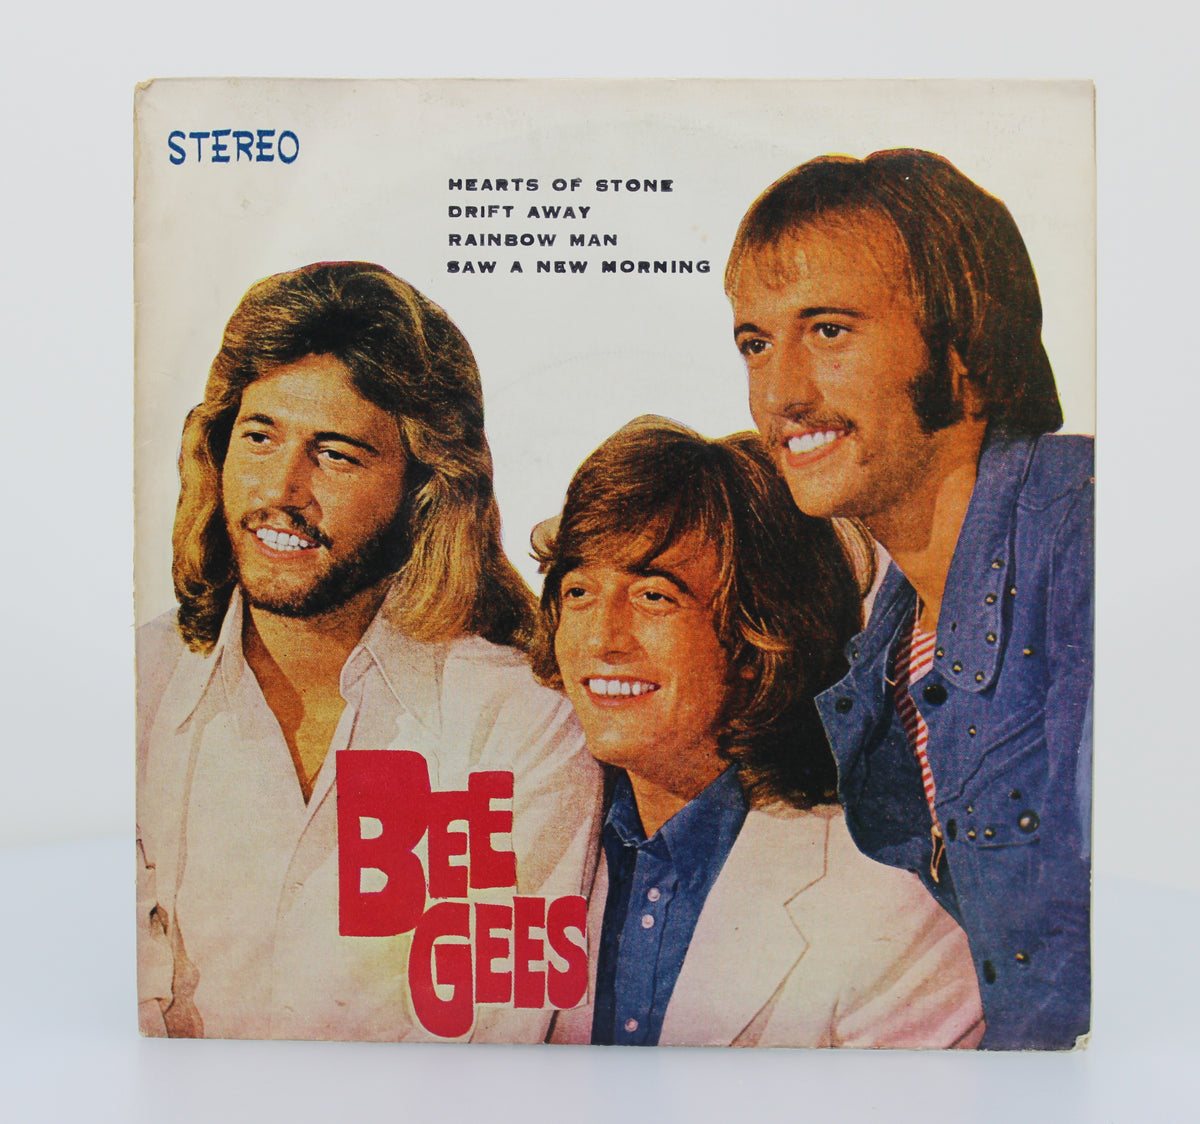 Bee Gees - Hearts Of Stone, Vinyl EP 45rpm, Thailand